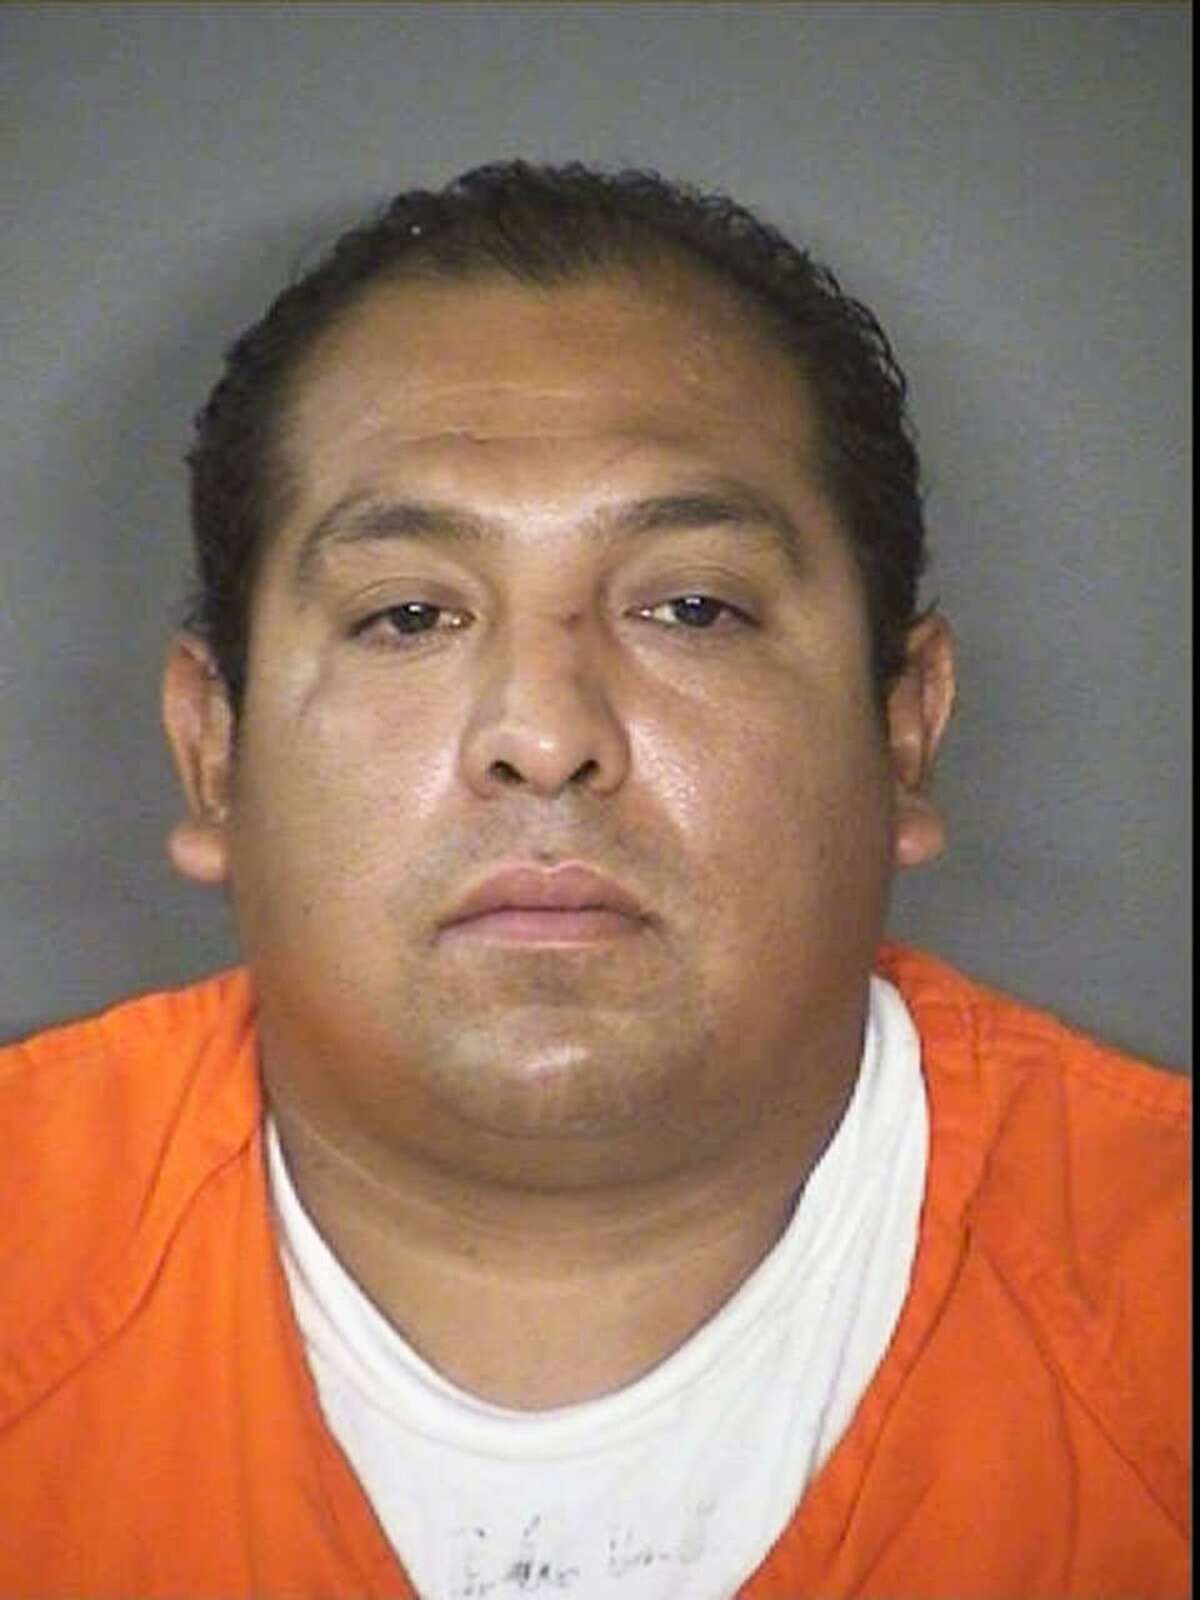 Ernesto Carraman, 41, died on May 28, 2016, after a struggle with two San Antonio police officers during which they repeatedly used a Taser on him. Officials said a number of factors contributed to Carraman’s death, including heart disease, cocaine intoxication, the struggle and the effect of the Taser. The department found no wrongdoing on the part of the officers.